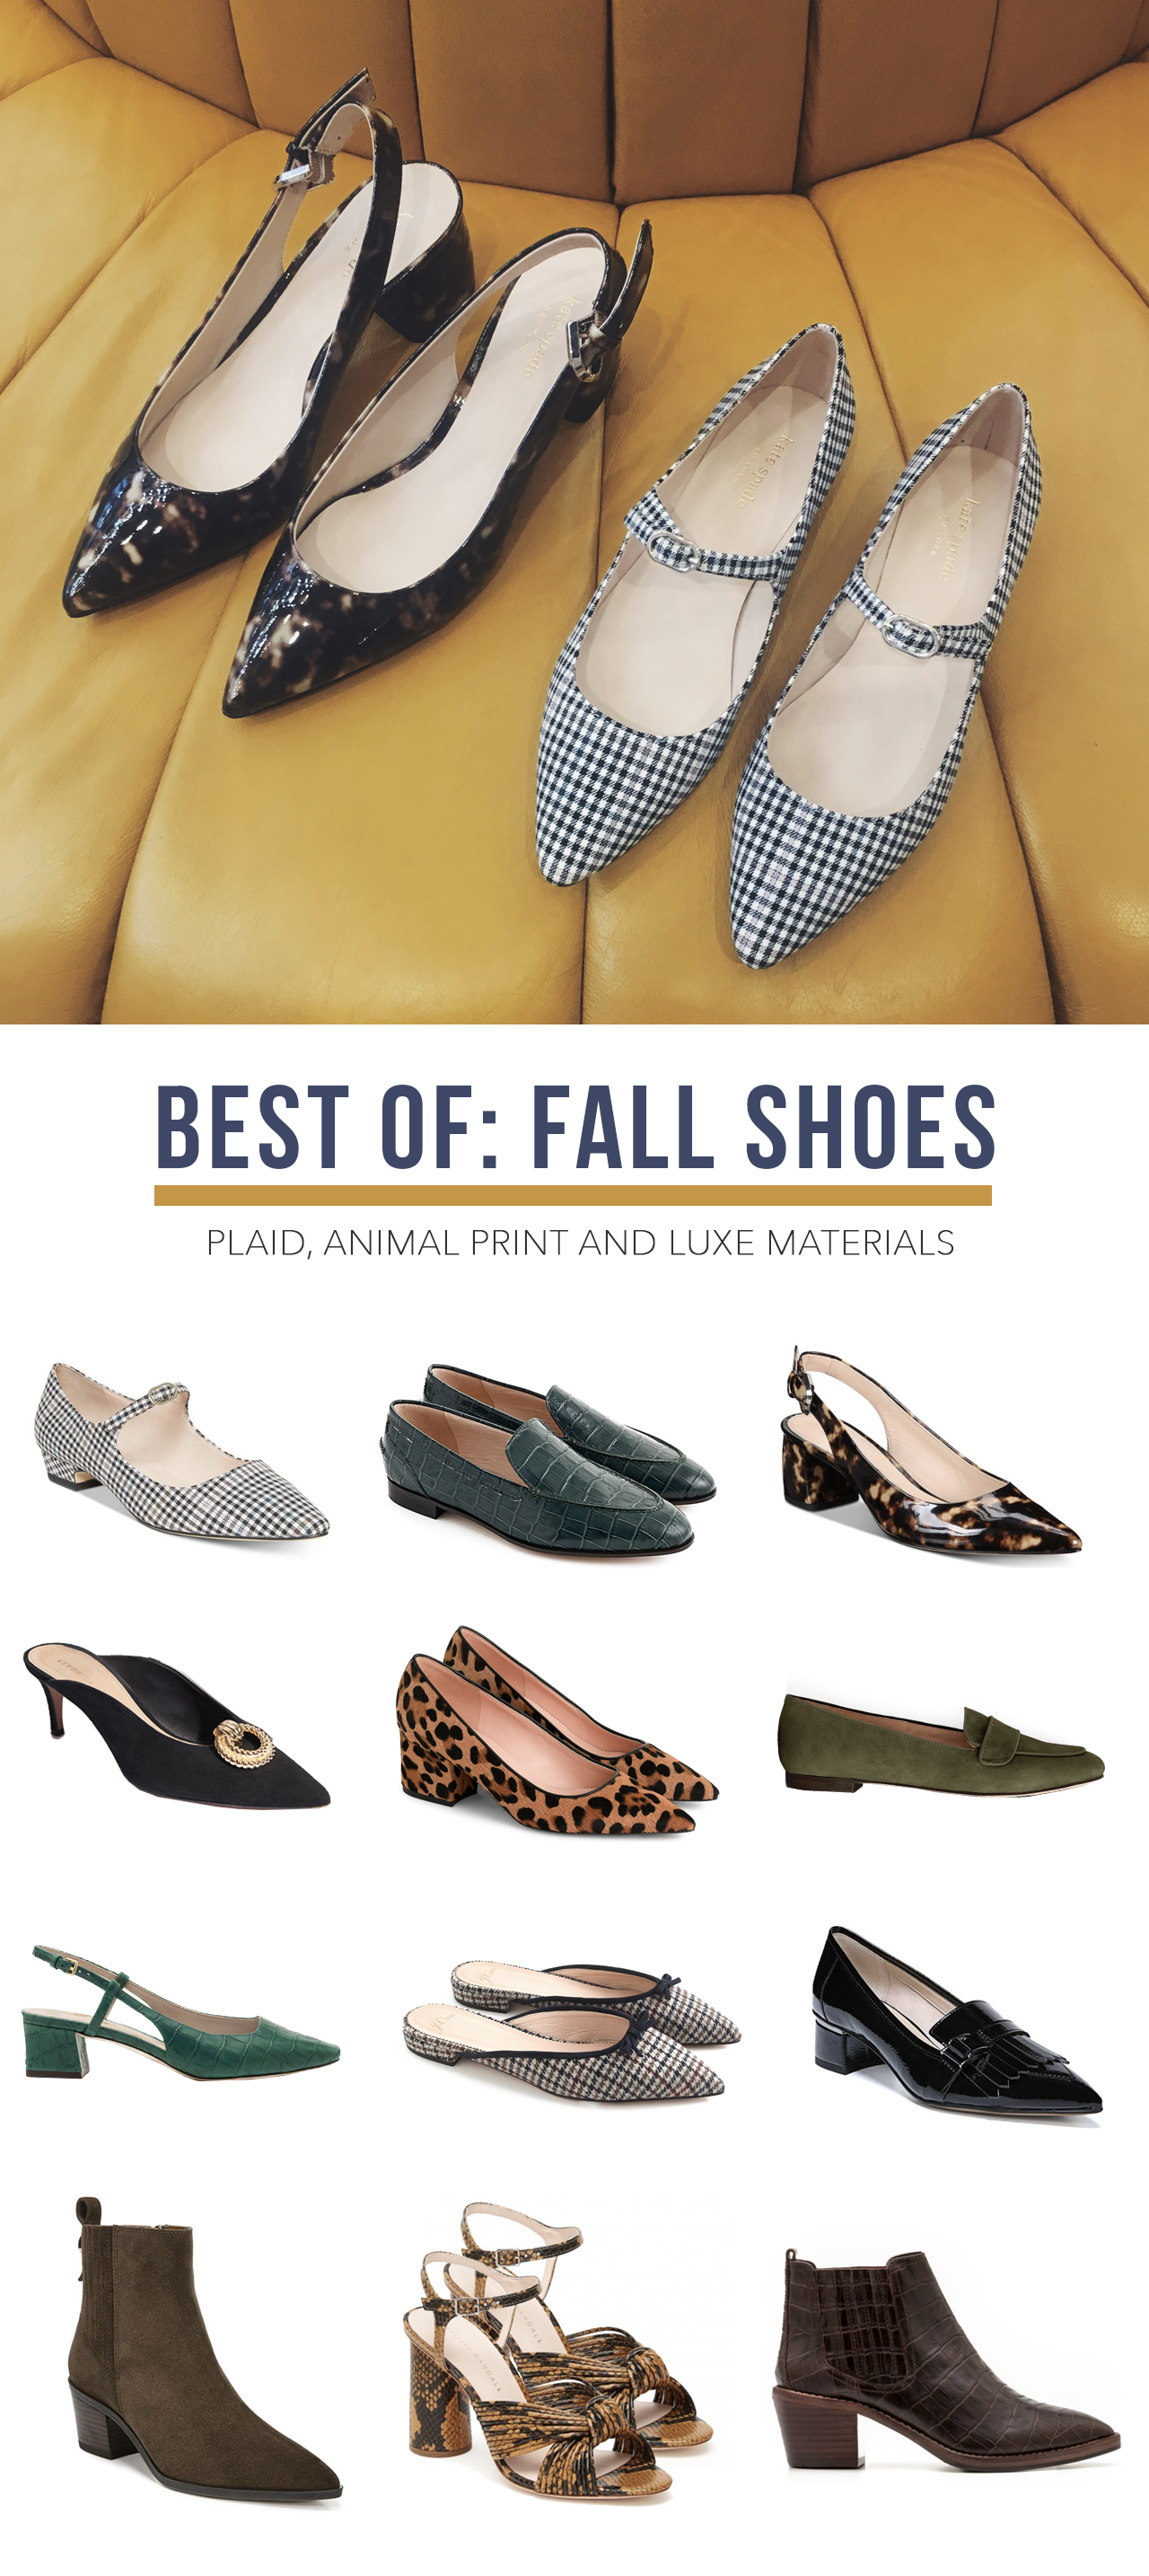 THE BEST FALL SHOES TO SHOP NOW – The 